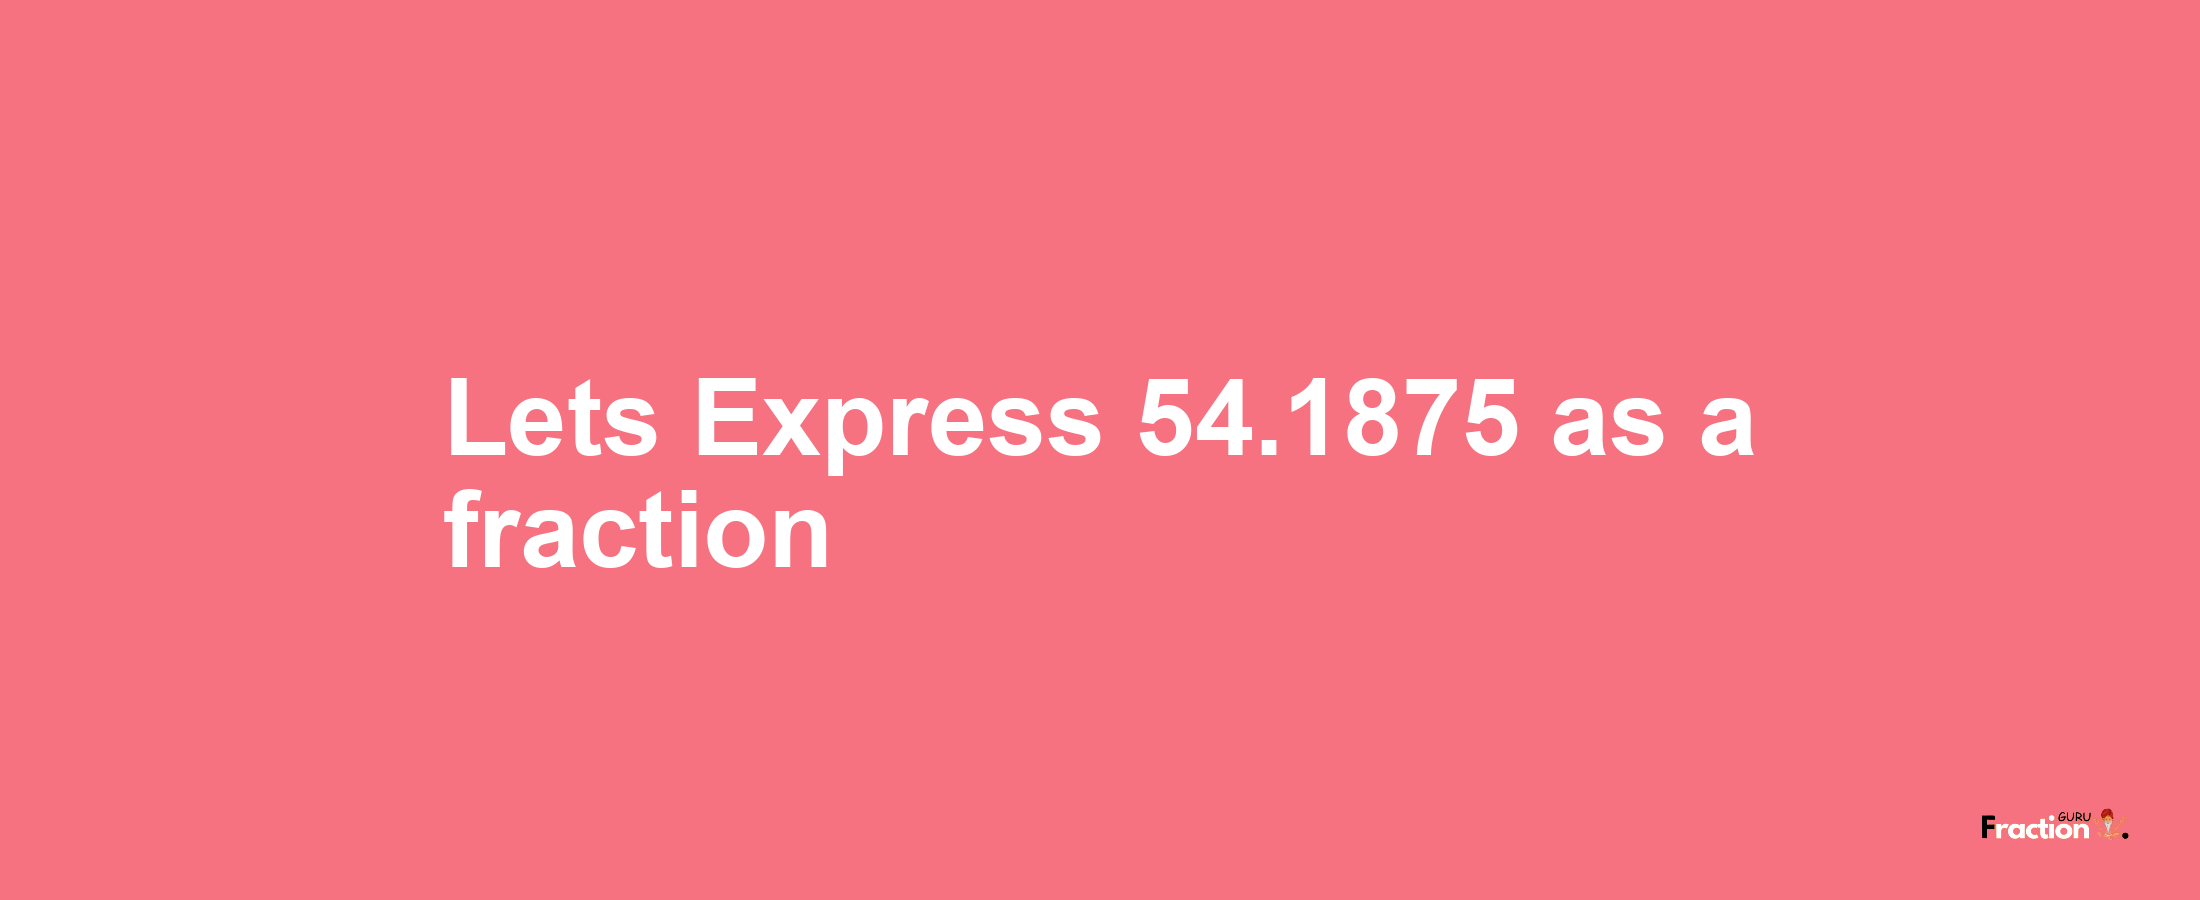 Lets Express 54.1875 as afraction